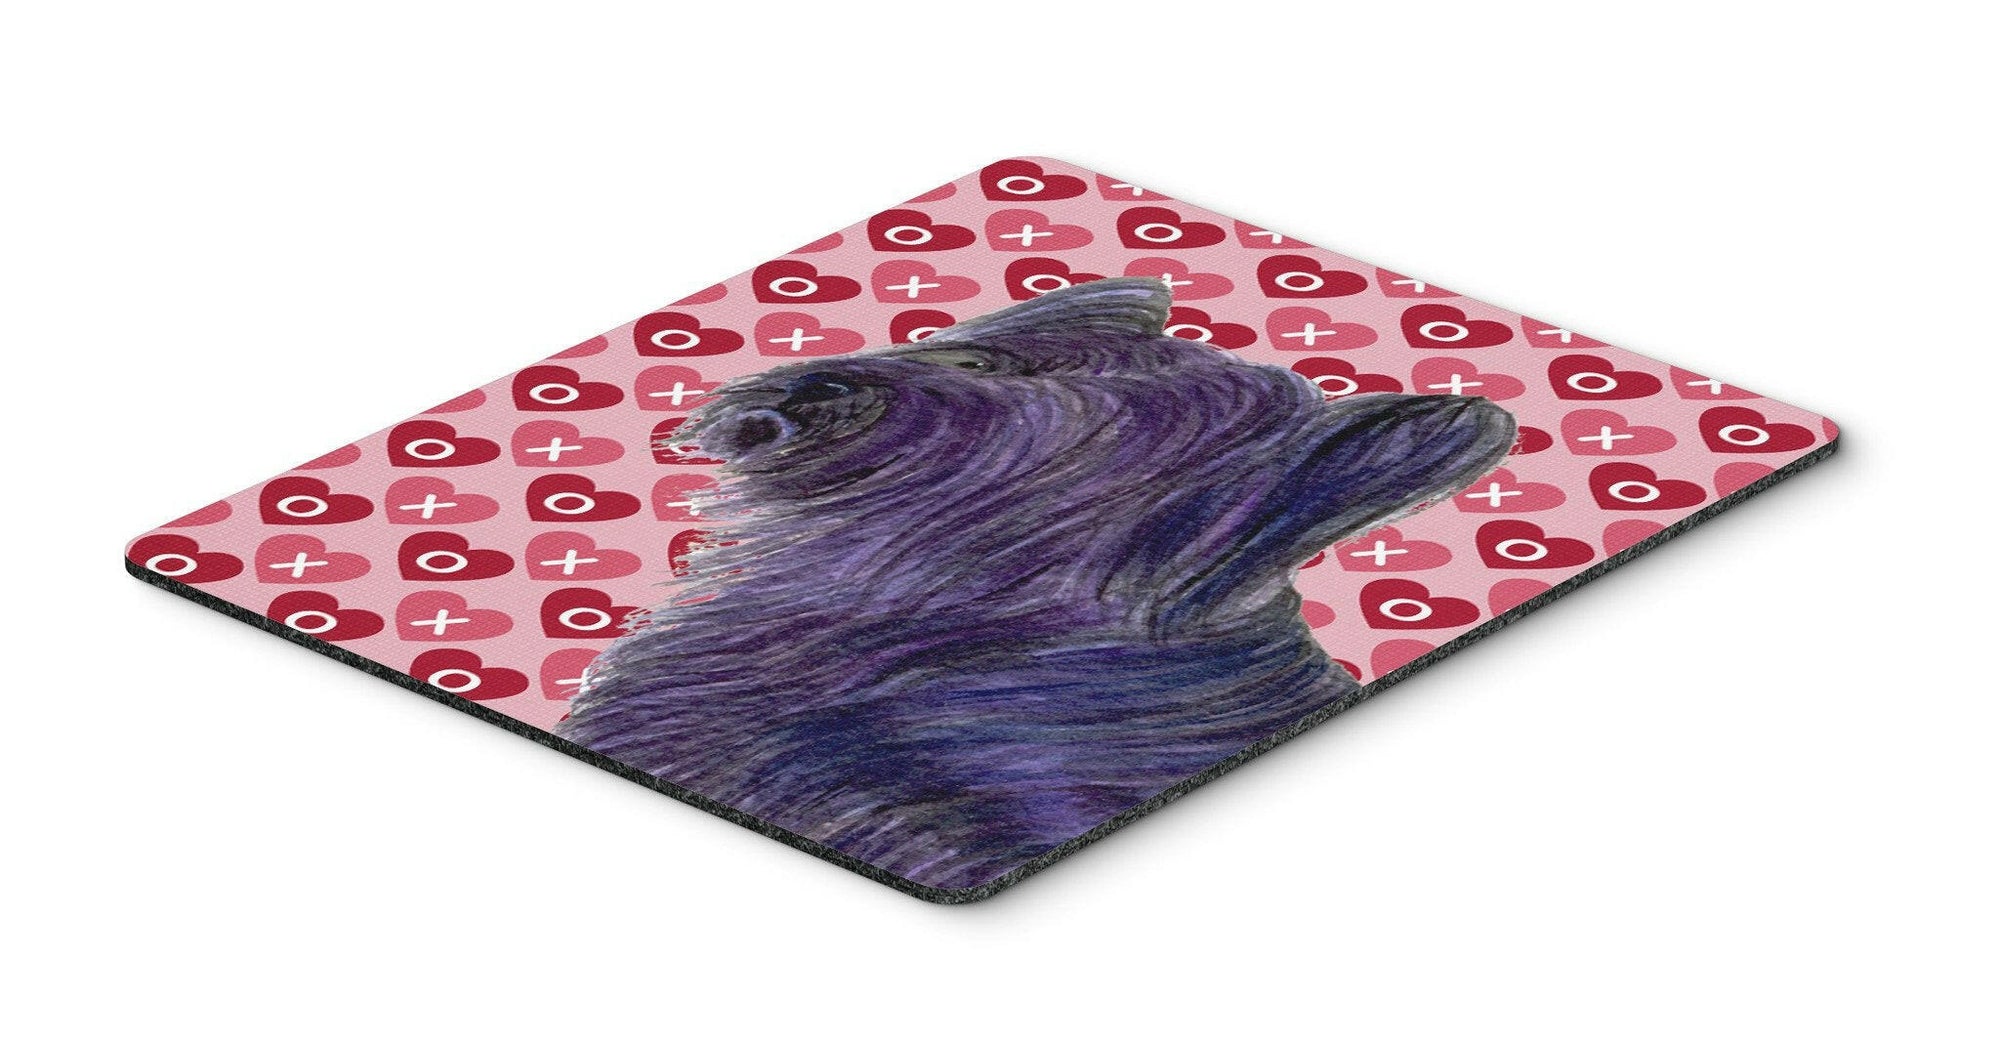 Skye Terrier Hearts Love and Valentine's Day Mouse Pad, Hot Pad or Trivet by Caroline's Treasures